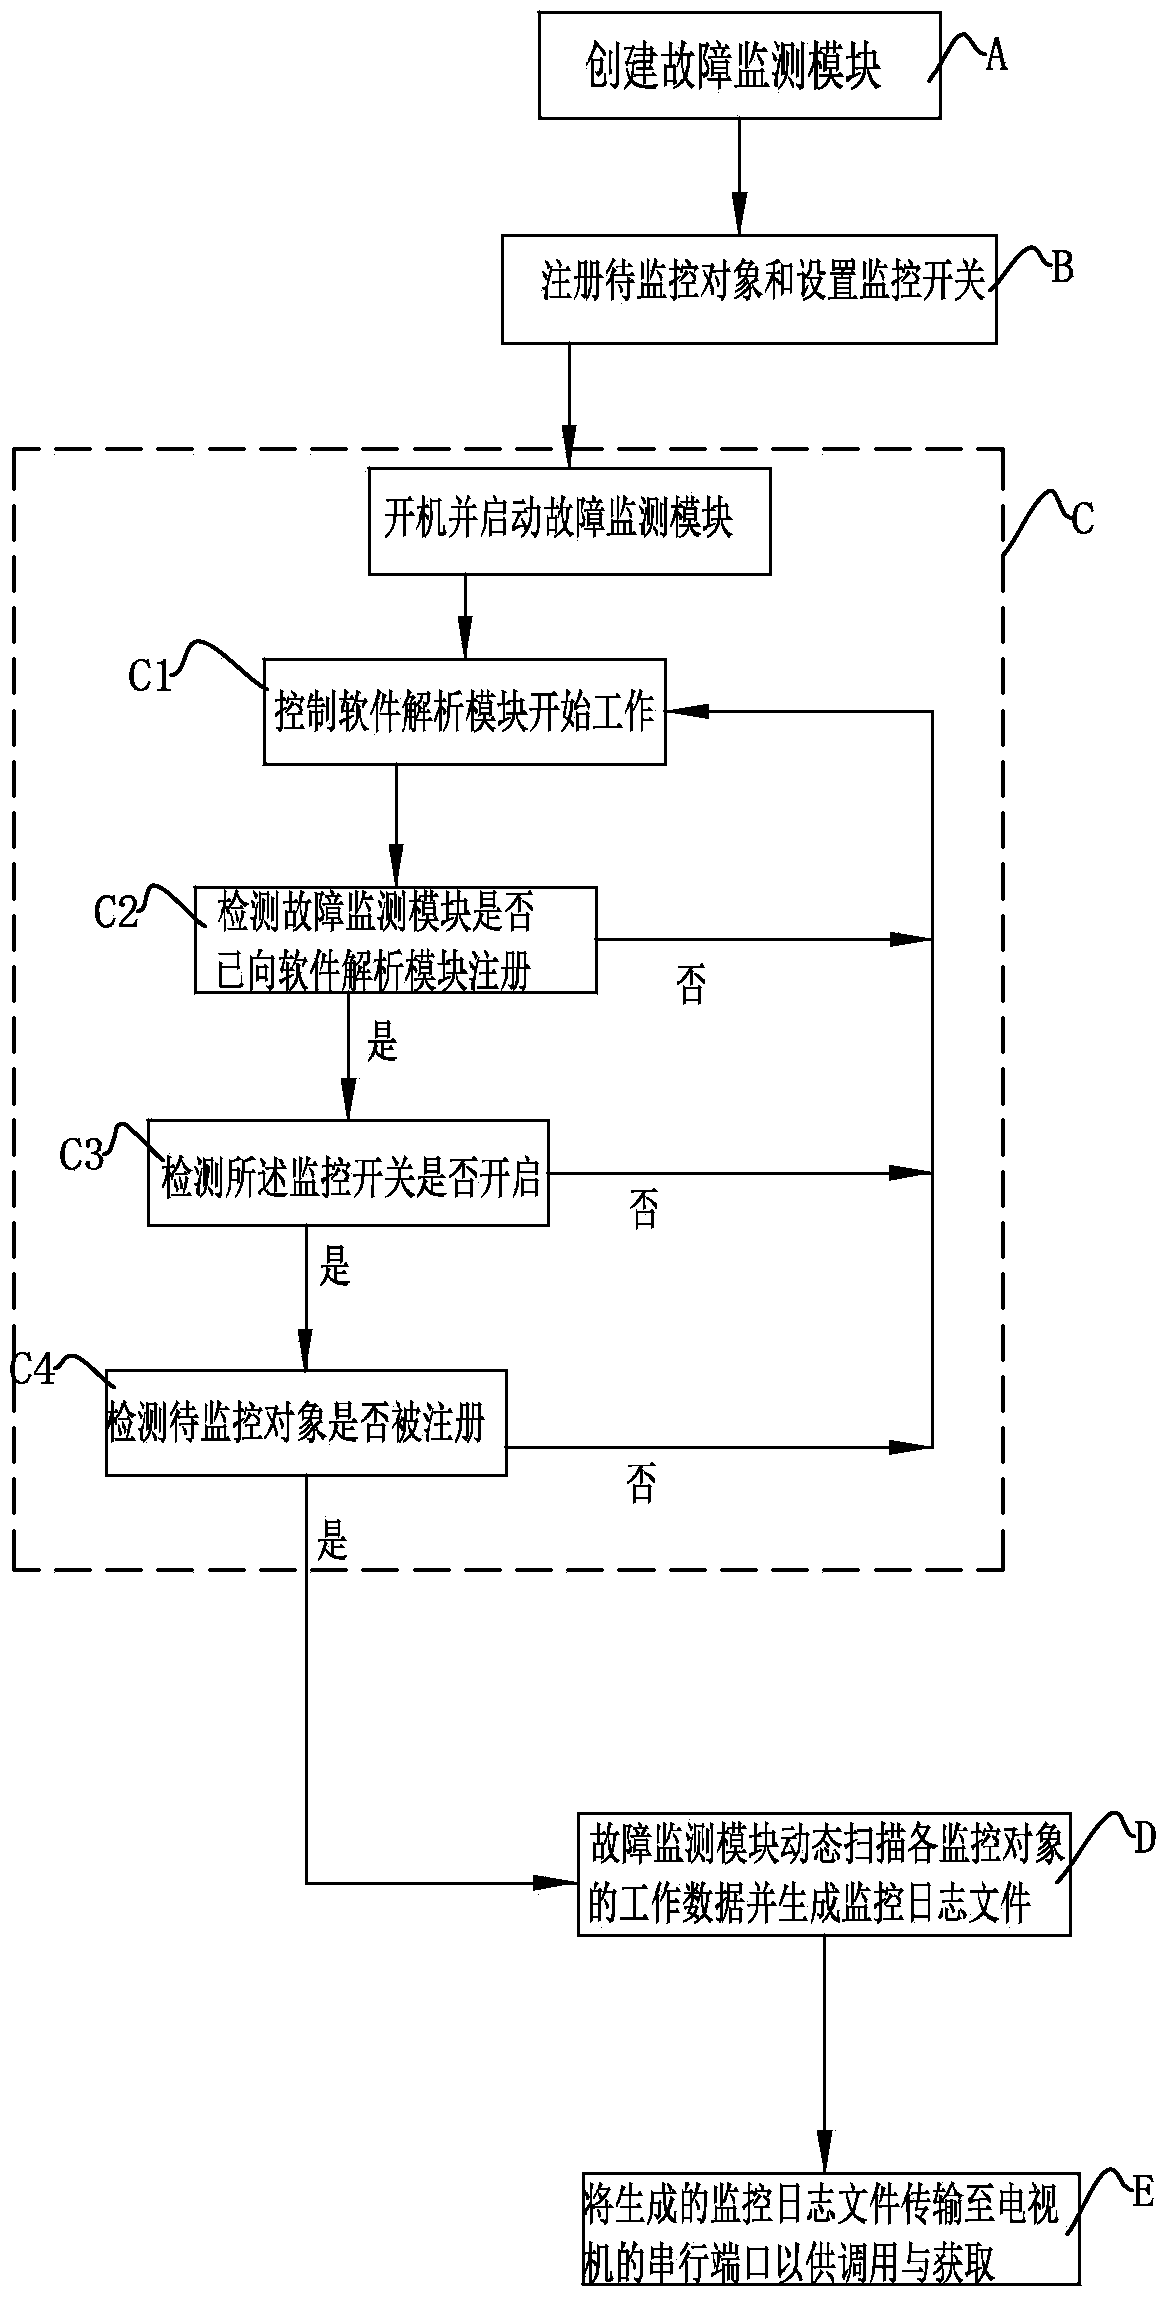 Fault monitoring method and system for television